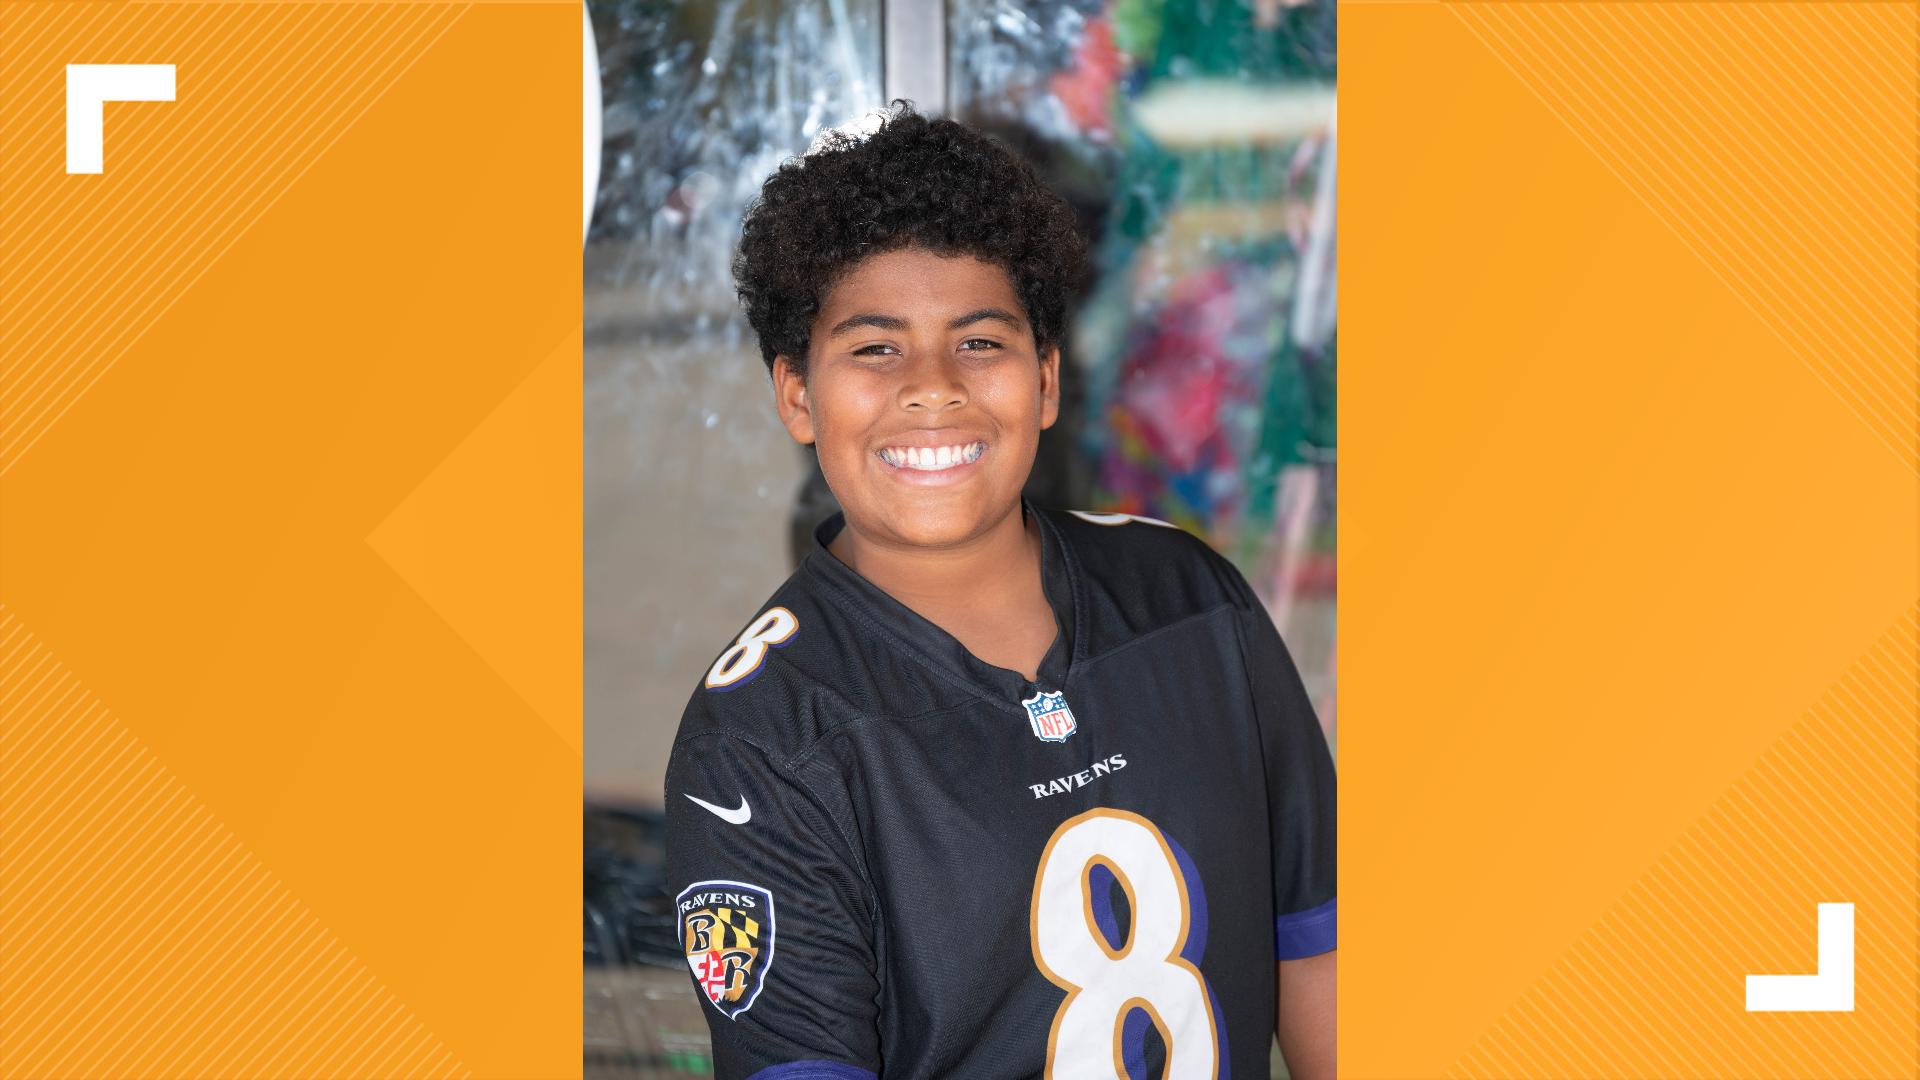 Jesus is an energetic 11-year-old boy who greets everyone he meets with a big, warm smile.